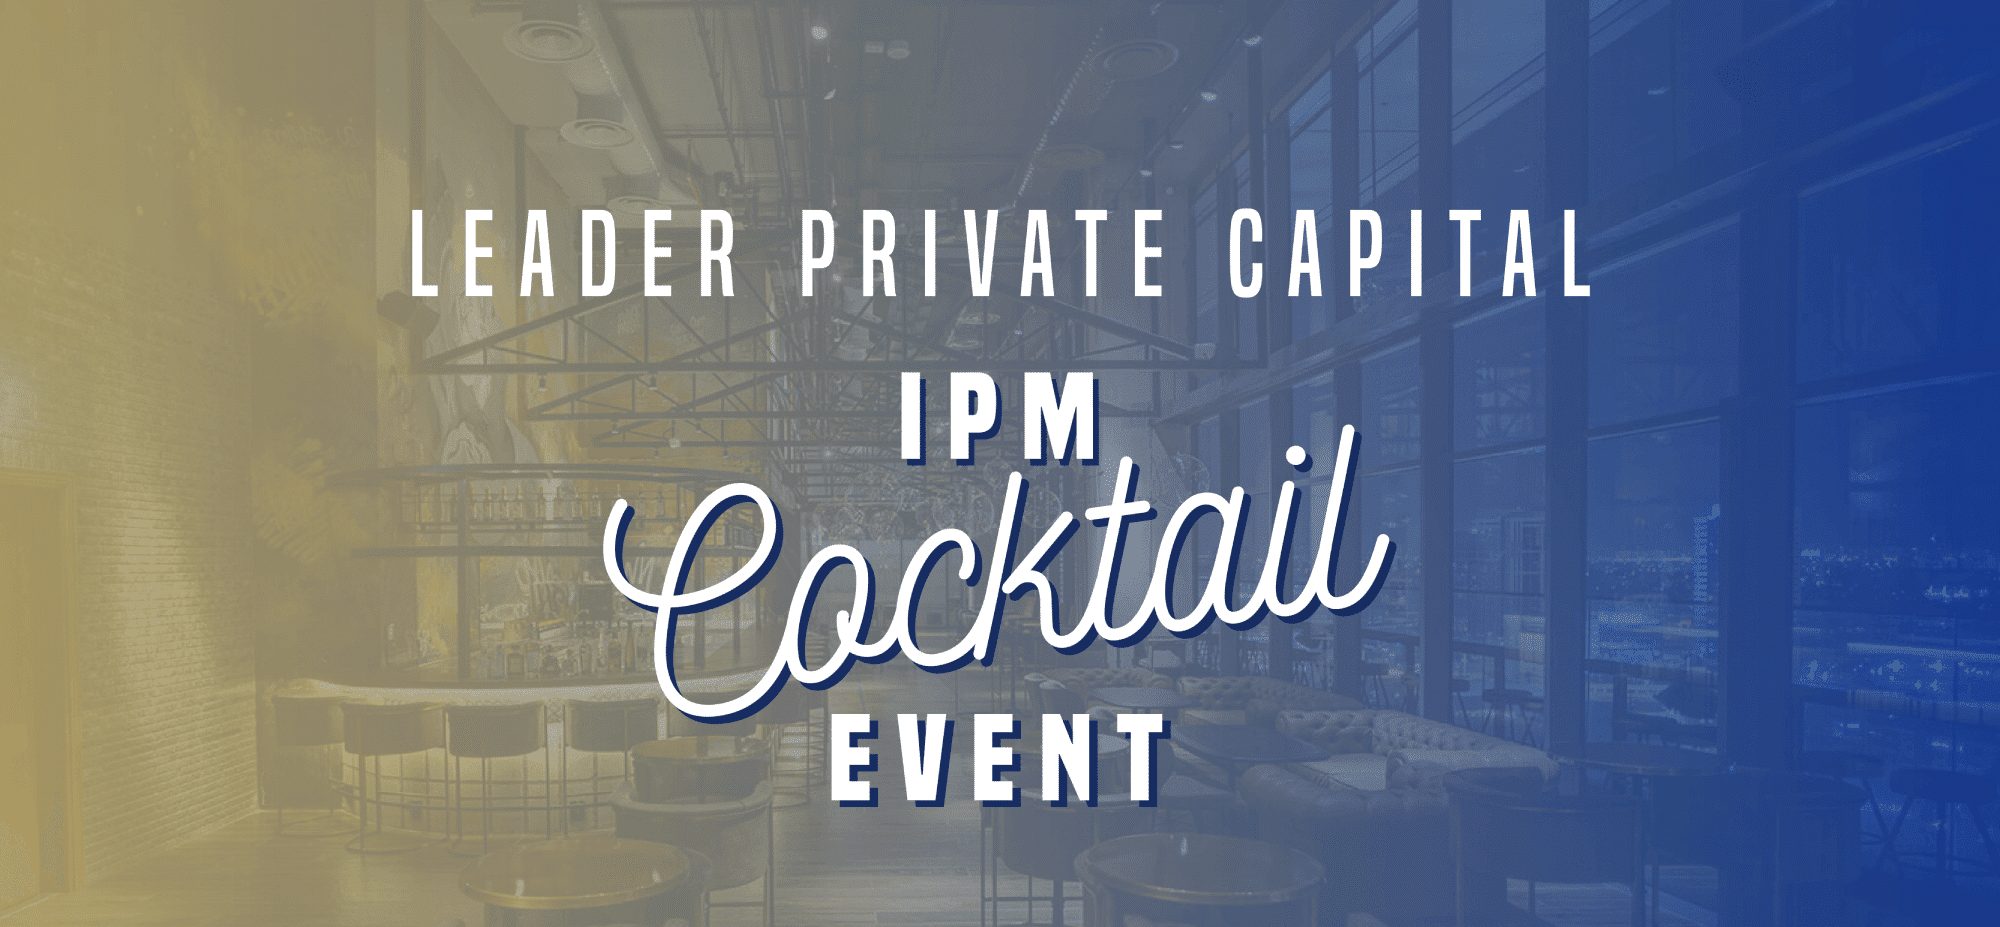 Leader Private Capital IPM Cocktail Event